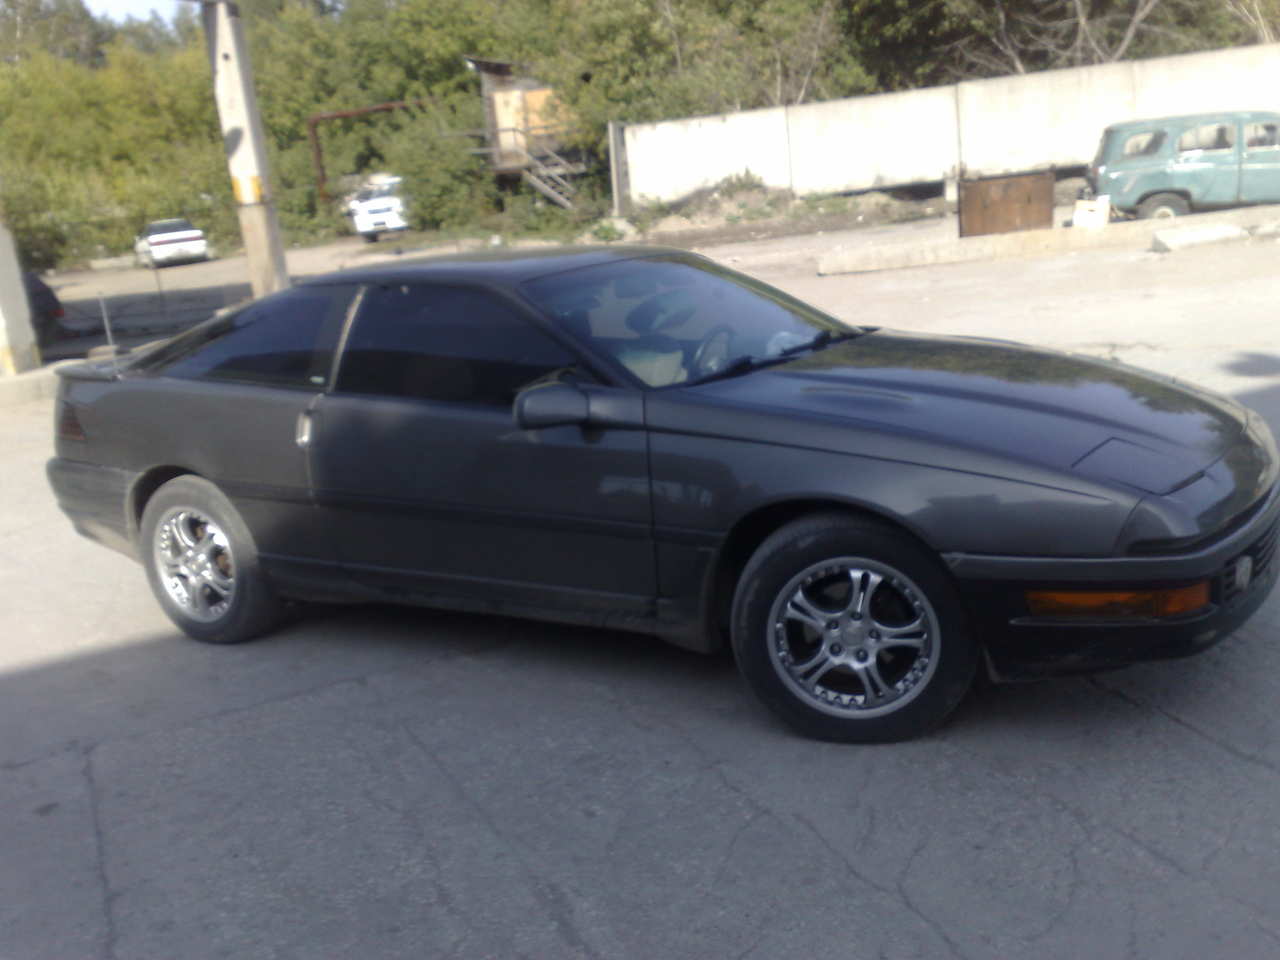 1993 Ford probe common problems